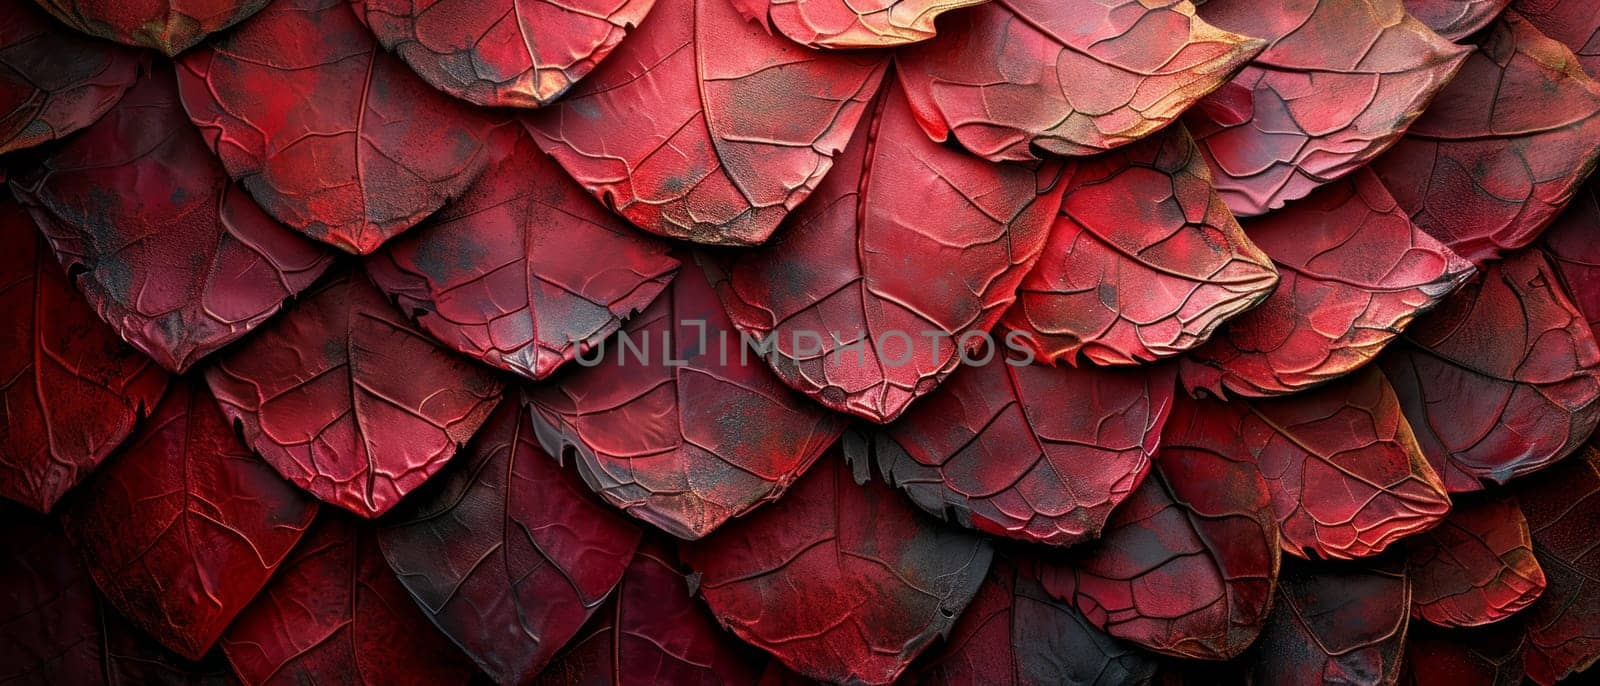 Vivid red snake skin texture with detailed scale patterns